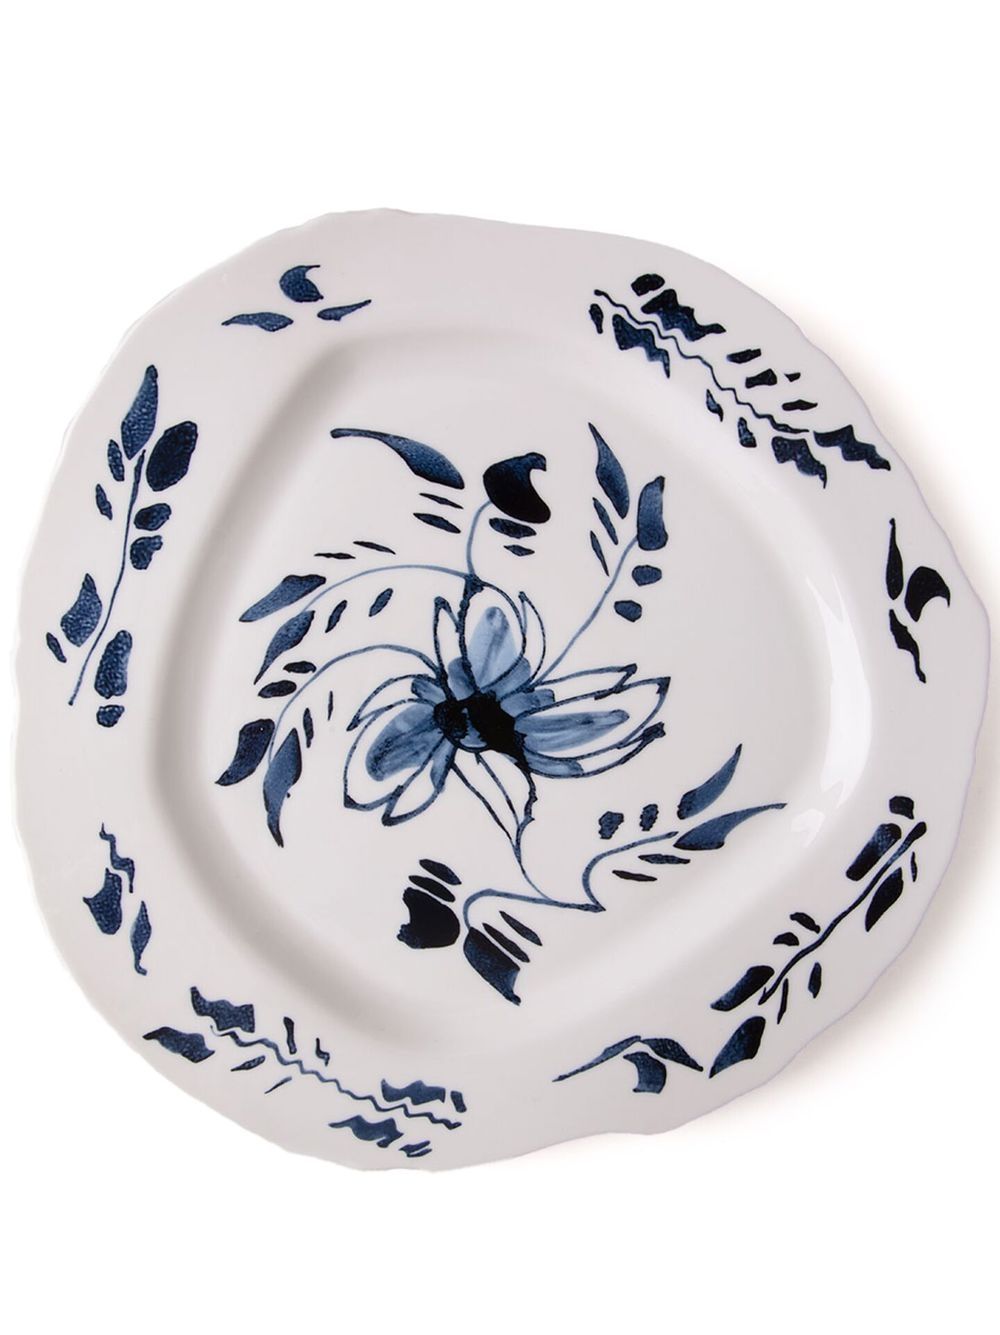 Seletti X Diesel Living English Delft Porcelain Plate In Weiss